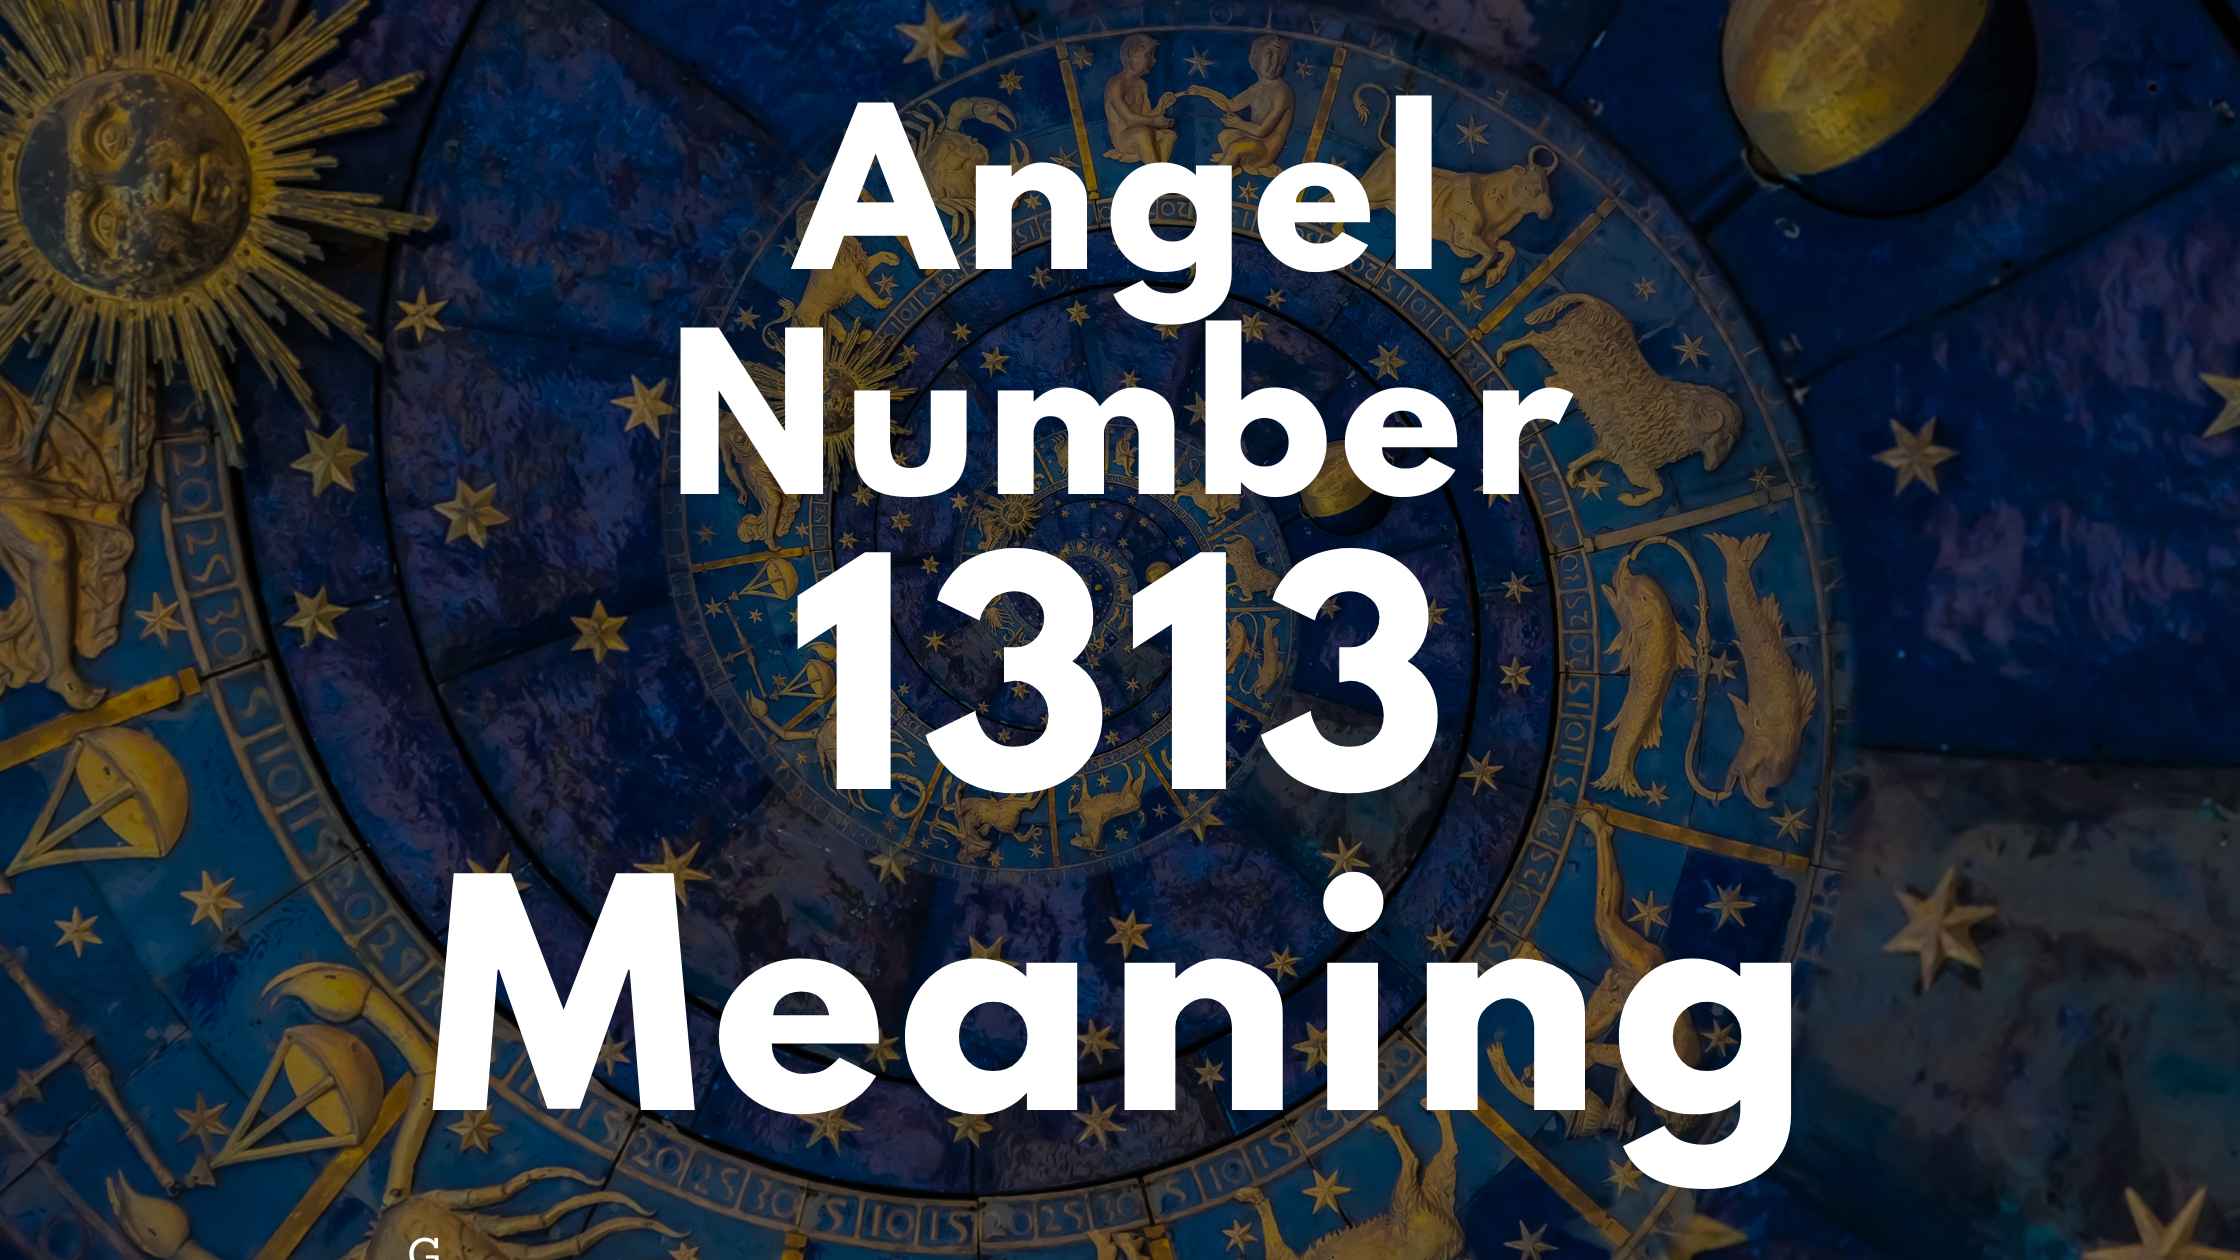 Angel Number 1313 Spiritual Meaning, Symbolism, and Significance